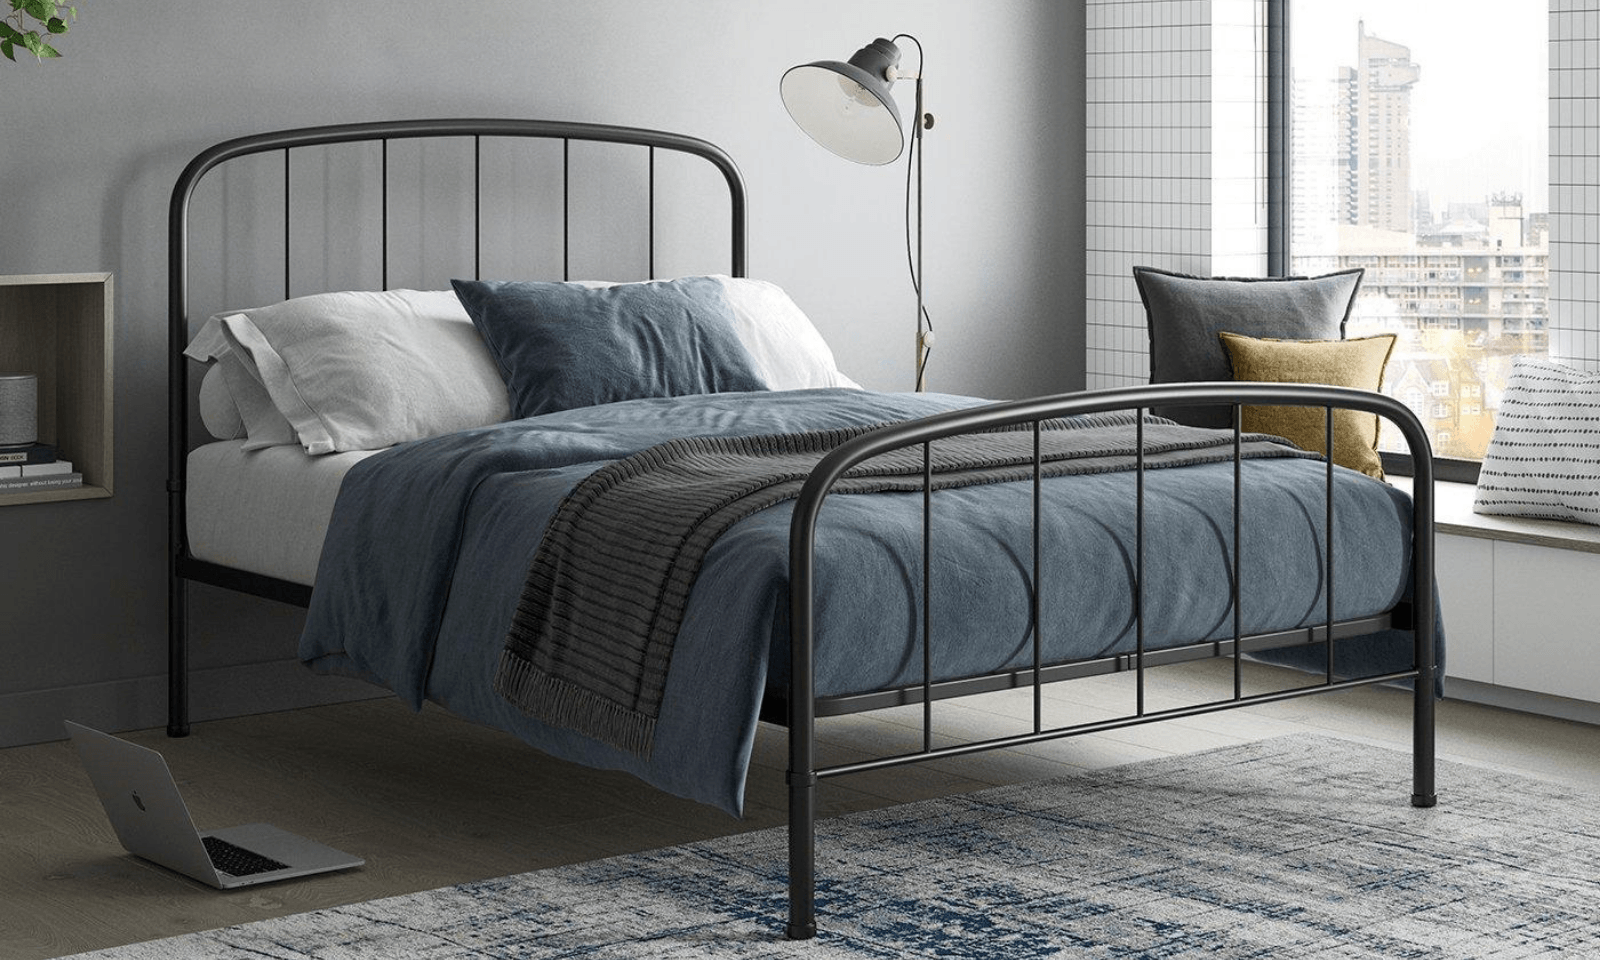 HOW TO CHOOSE THE RIGHT BED FRAME FOR YOUR BEDROOM